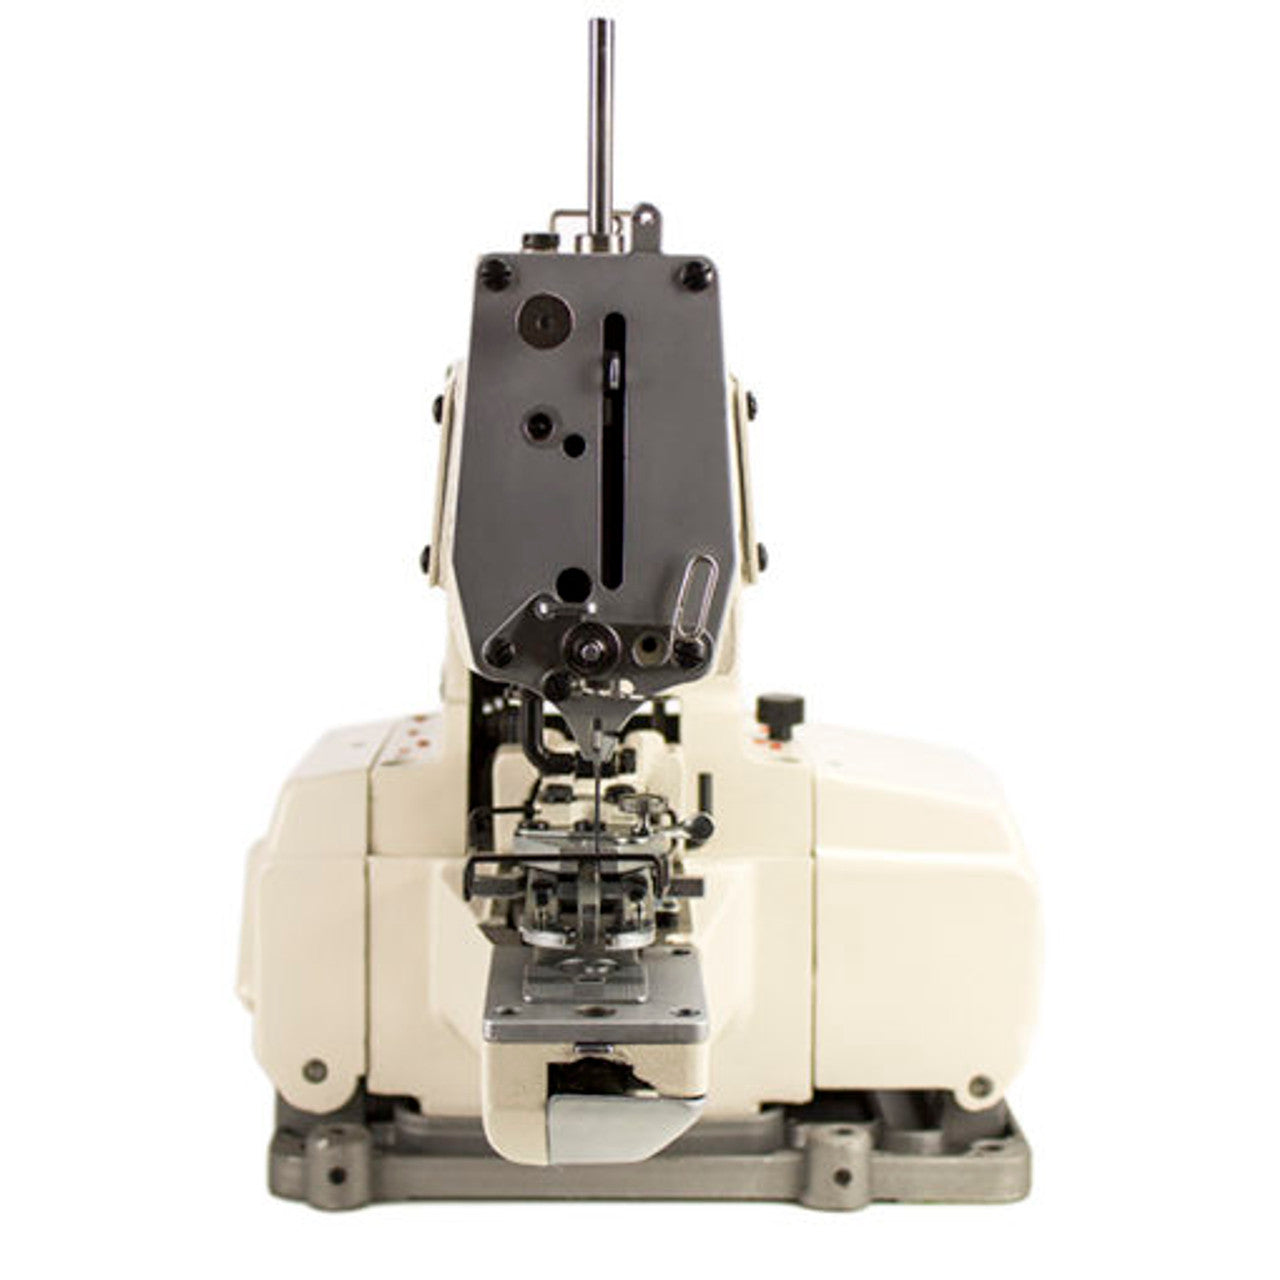 SPEEDWAY SW373 Single Thread Button Sewing Machine Assembled with Motor, Table and Stand Included